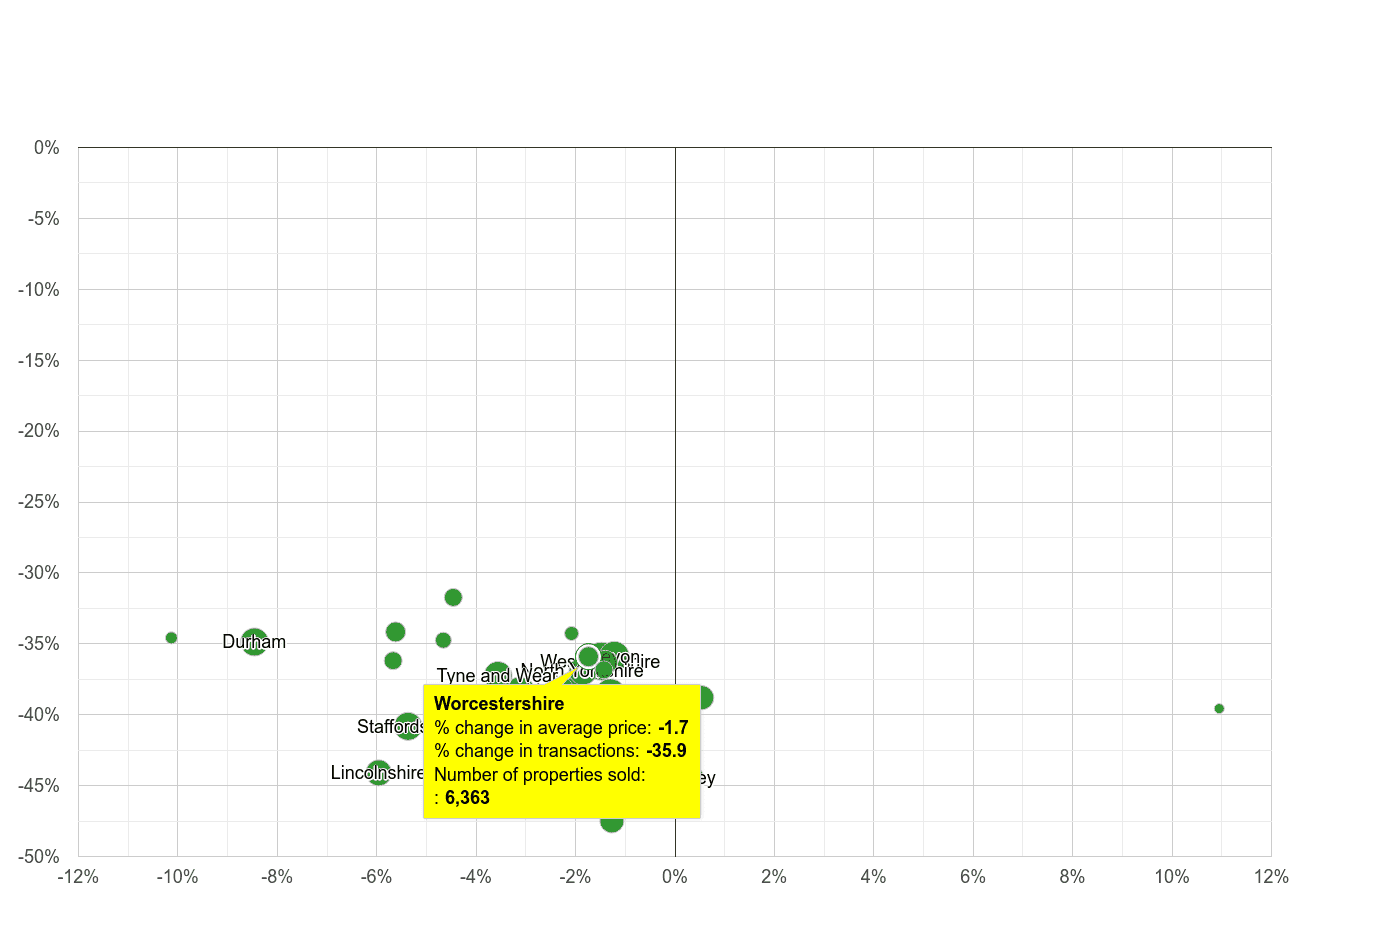 Worcestershire property price and sales volume change relative to other counties